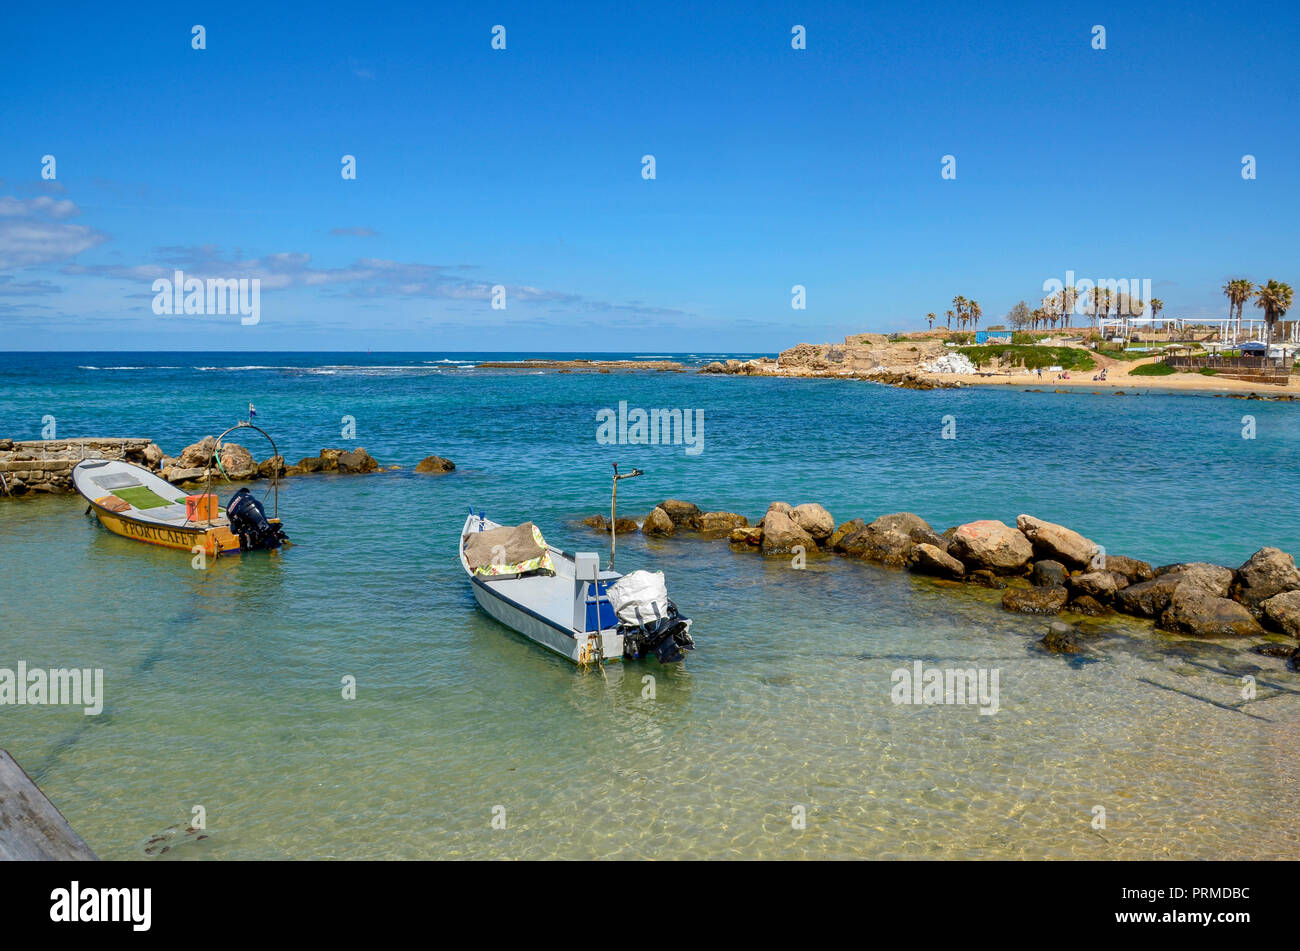 Israel, Caesarea, The old harbour now a resort beach Originally built by Herod the Great in the first century CE Stock Photo